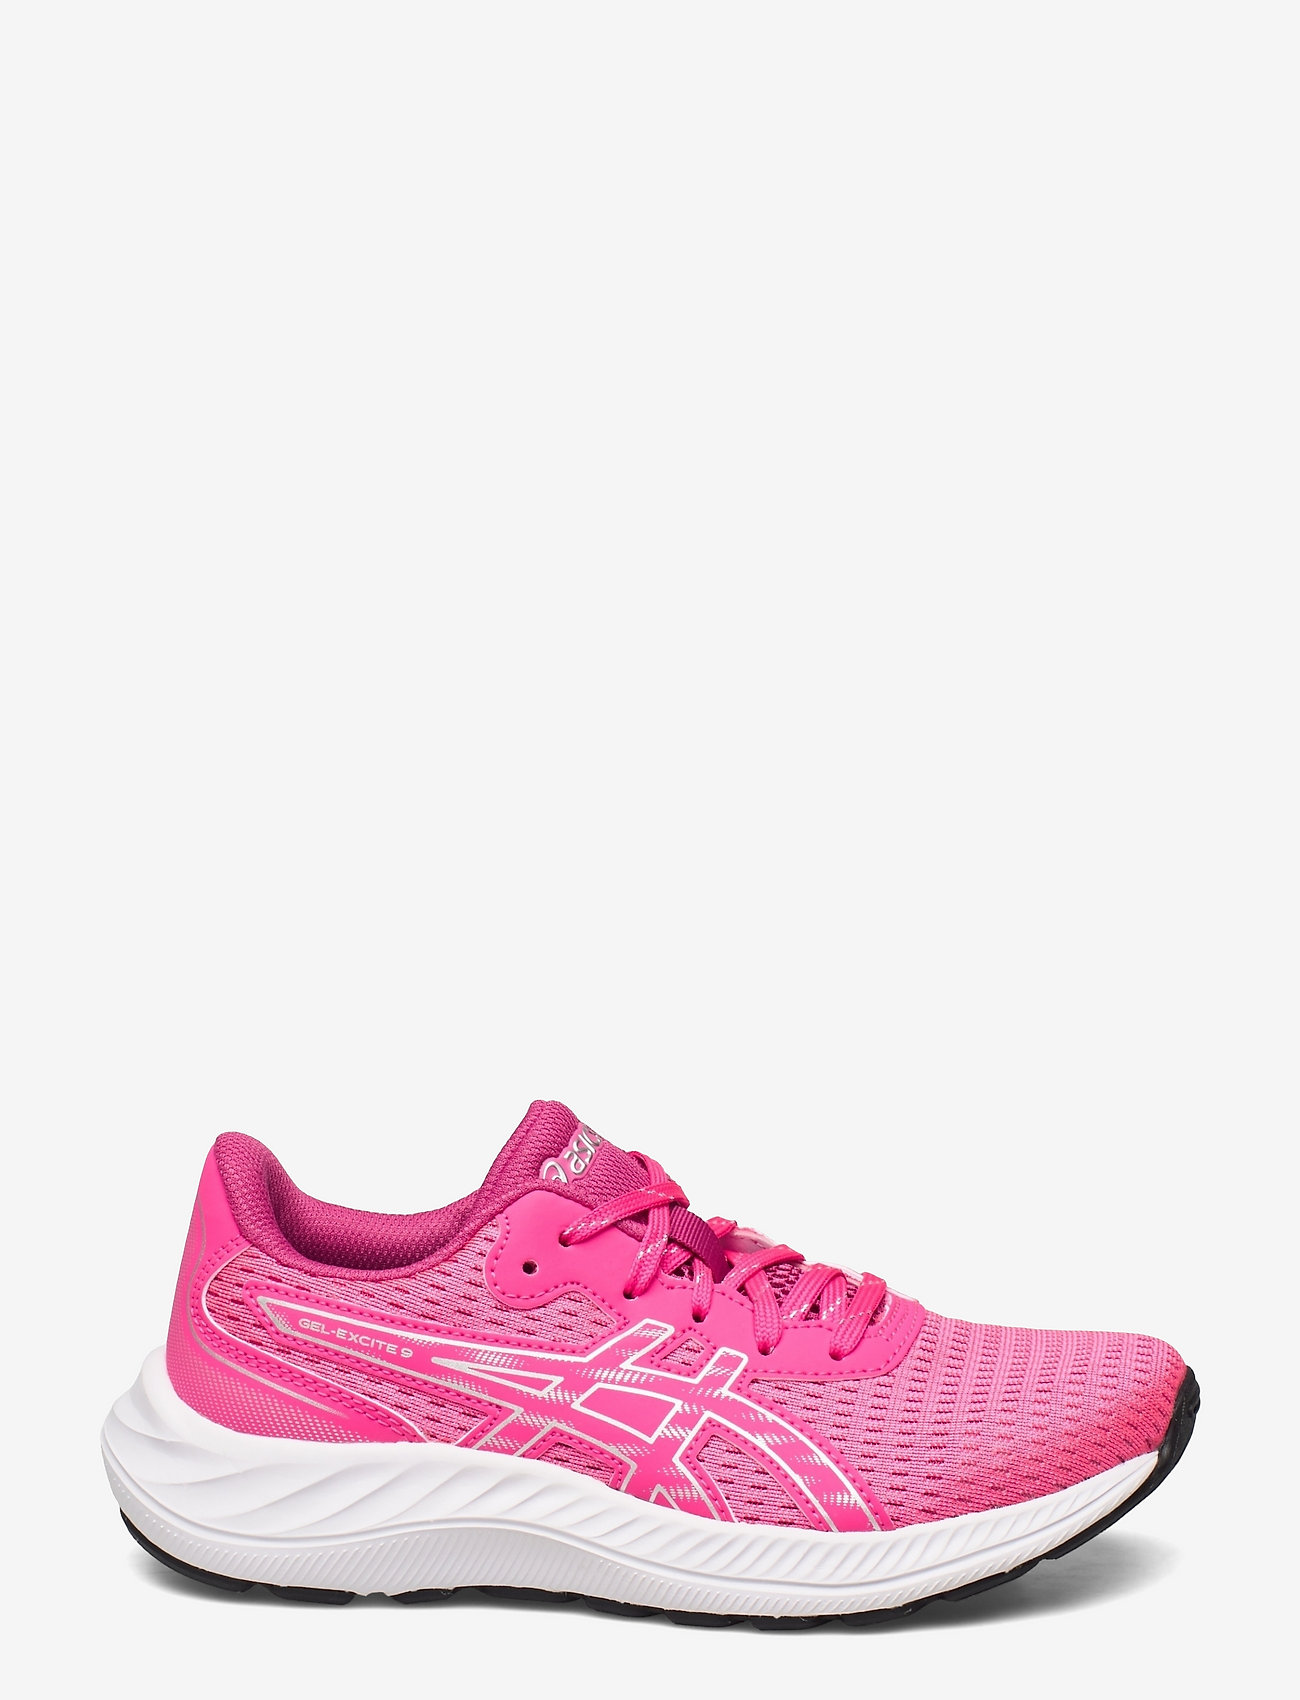 Asics - GEL-EXCITE 9 GS - trainingsschuhe - pink glo/pure silver - 1